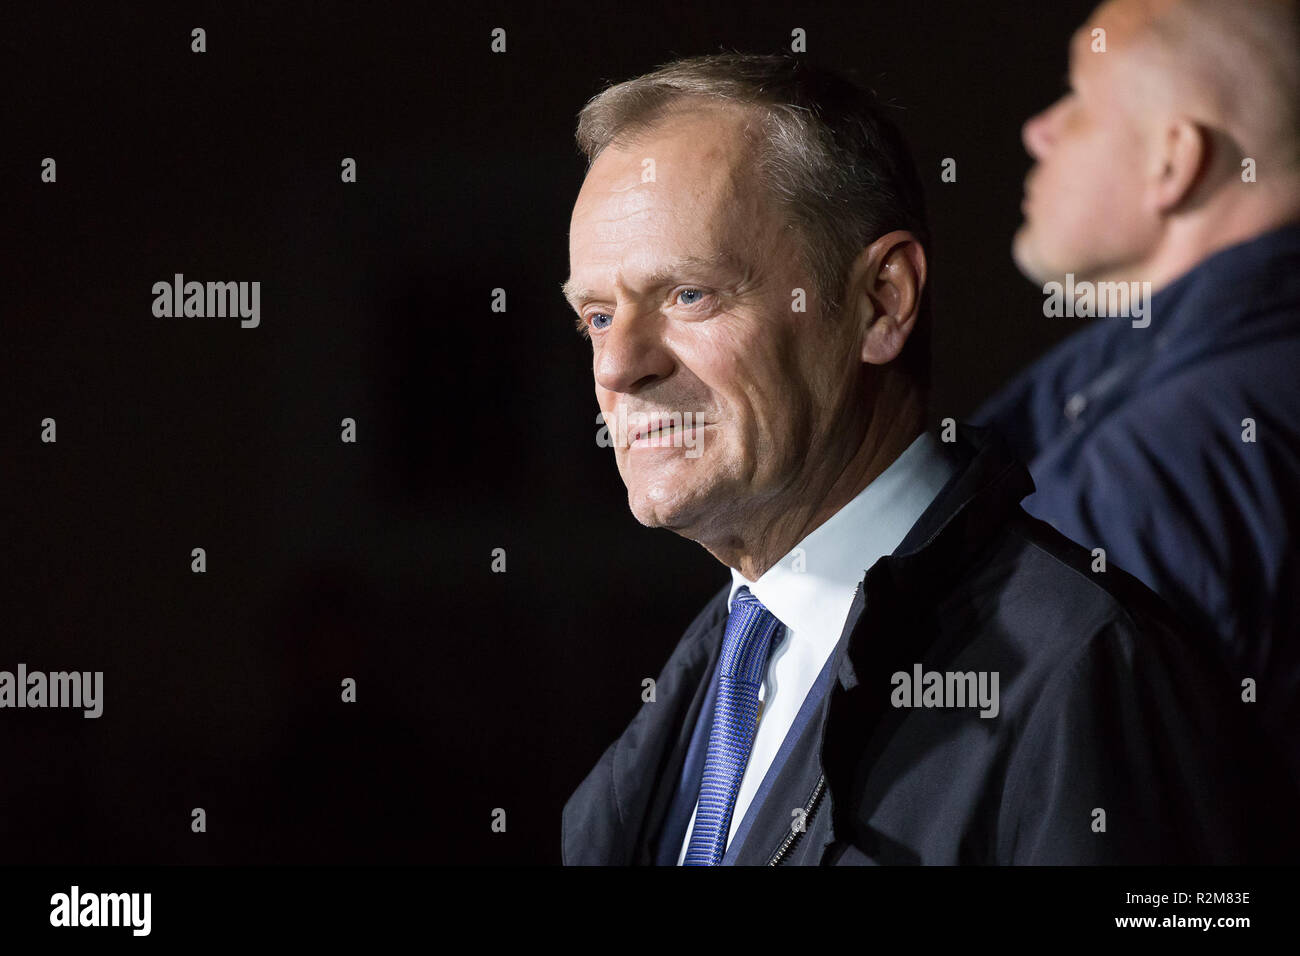 Former Polish Prime Minister, President of the European Council Donald Tusk during the press conference after leaving the prosecutor's office in Warsaw, Poland on 19 April 2017 Stock Photo